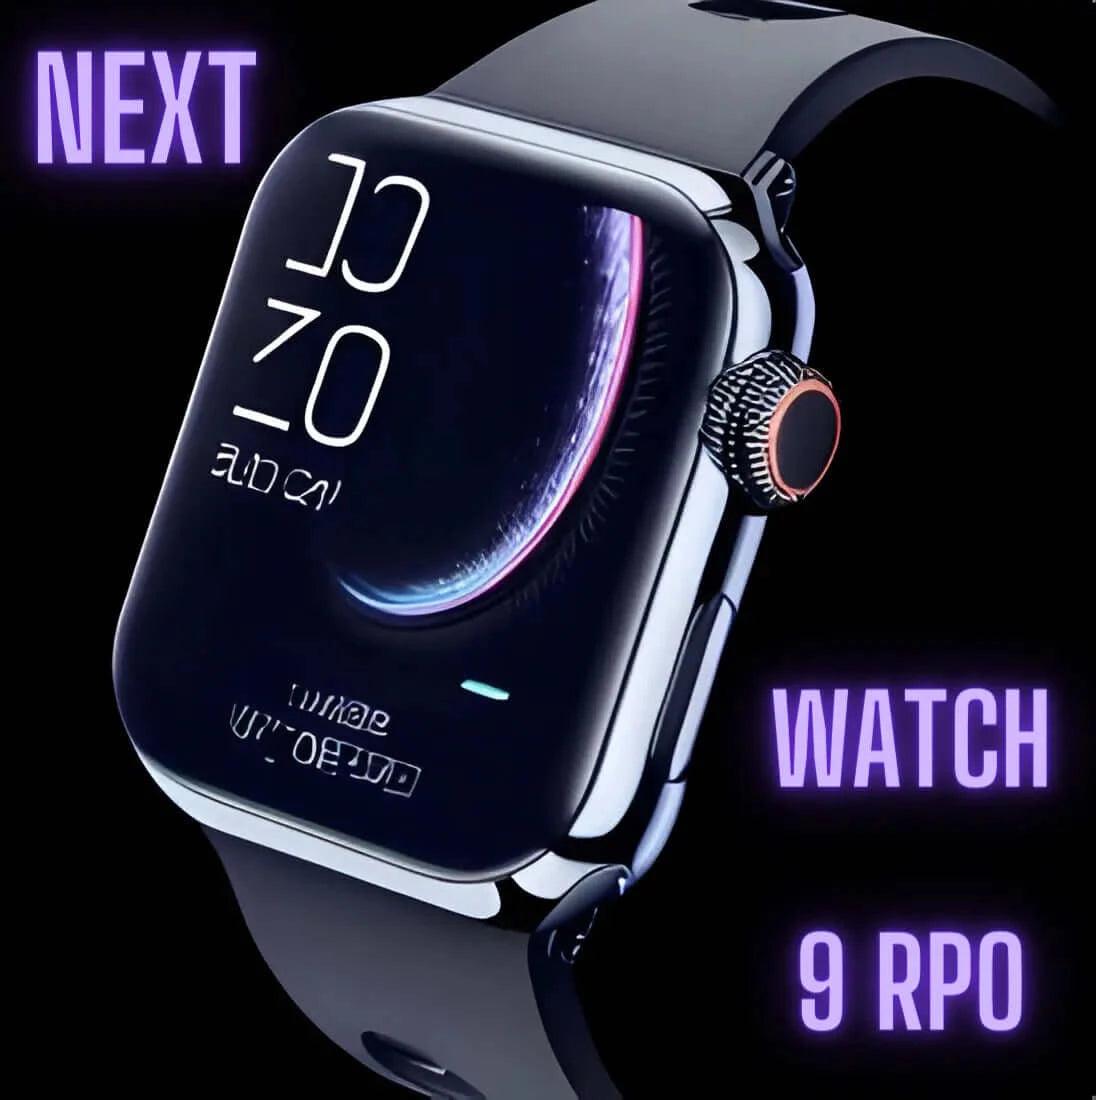 main image for watch 9 pro